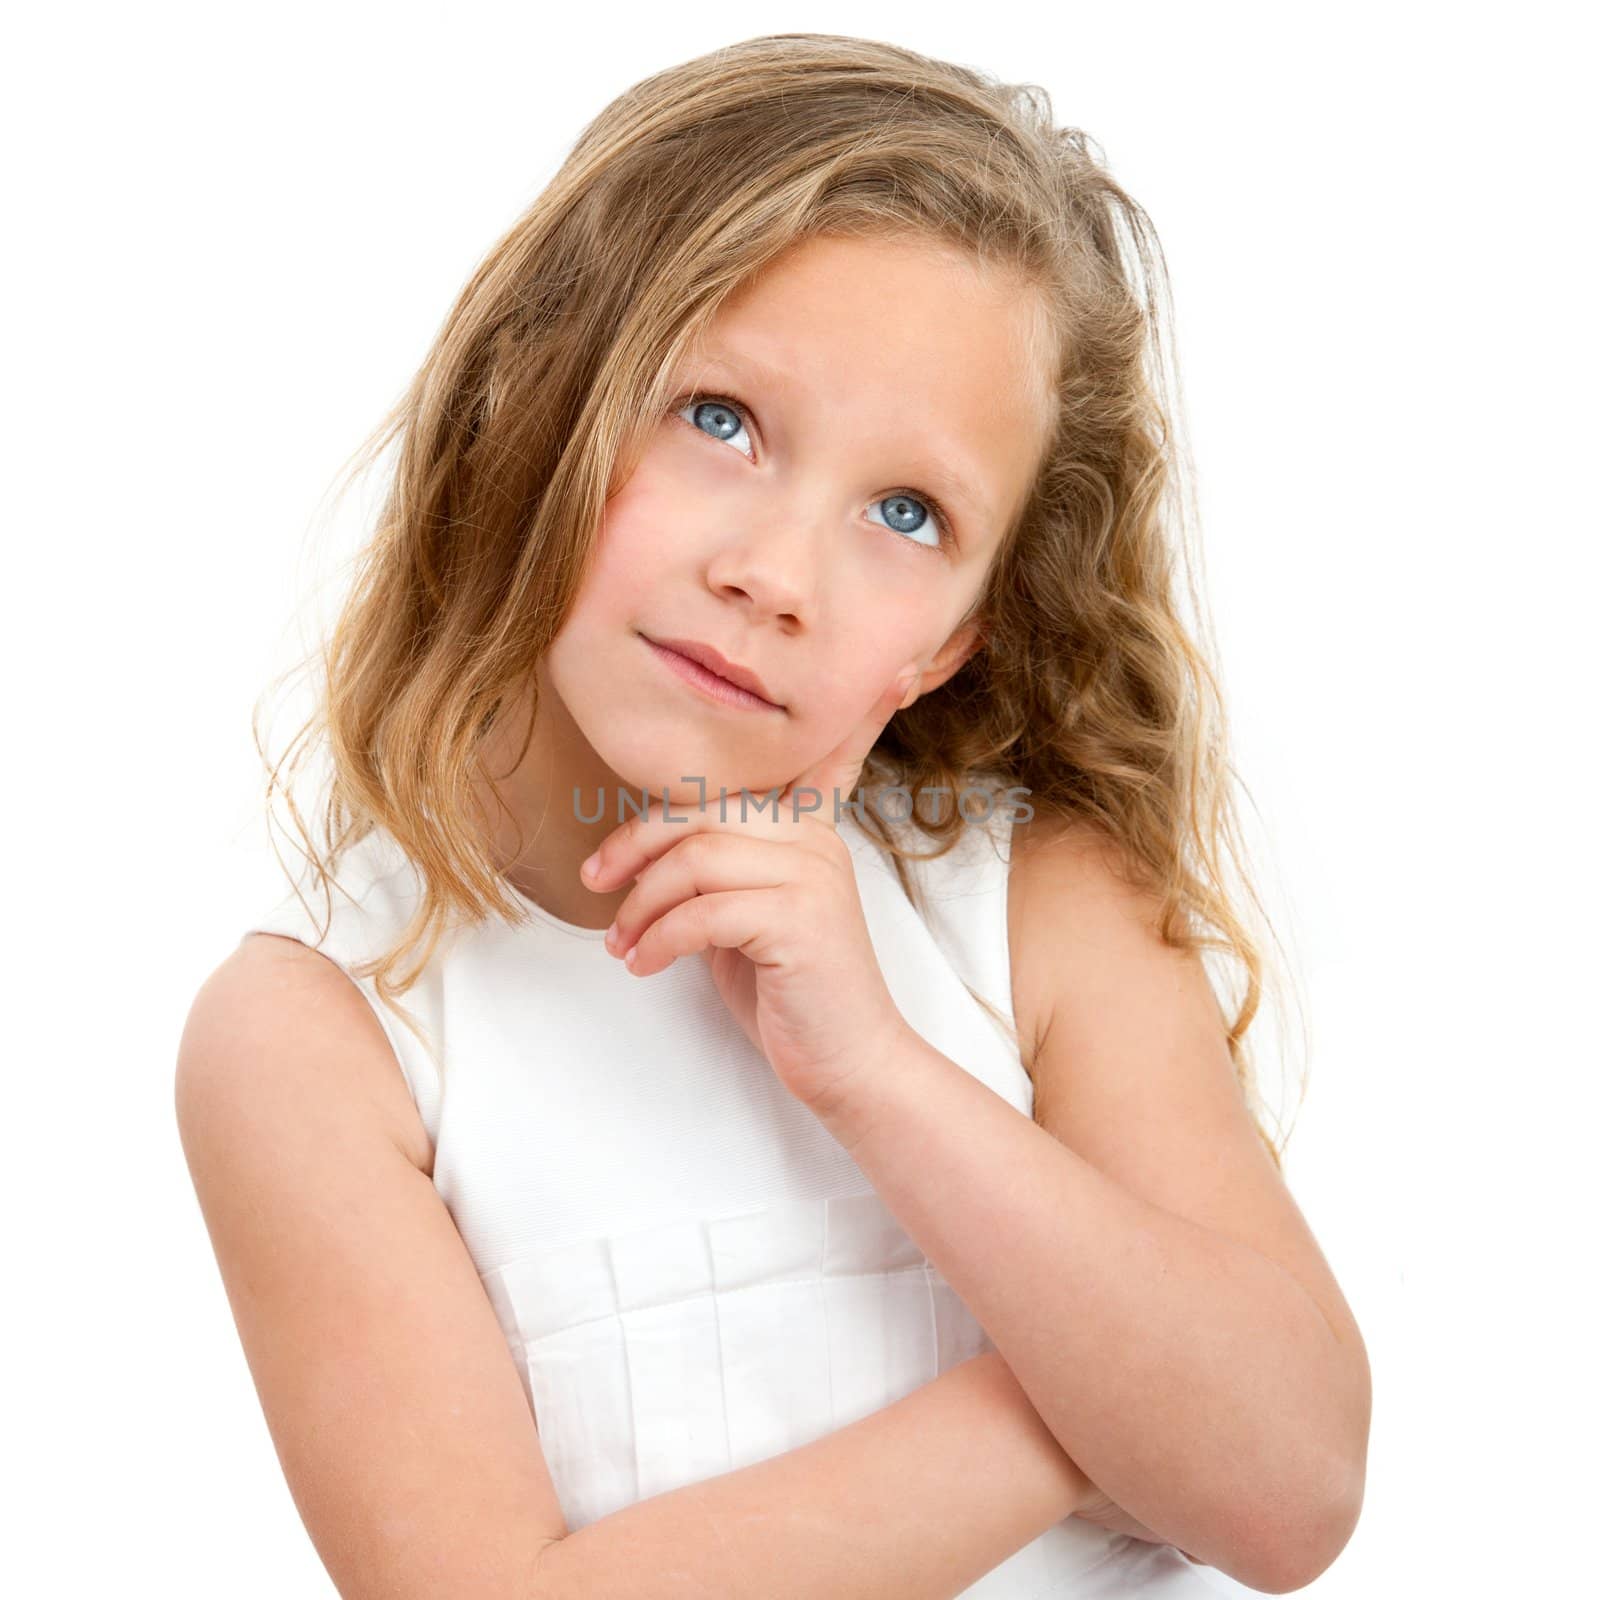 Close up Portrait of cute little girl with wondering face expression. Isolated on white background.